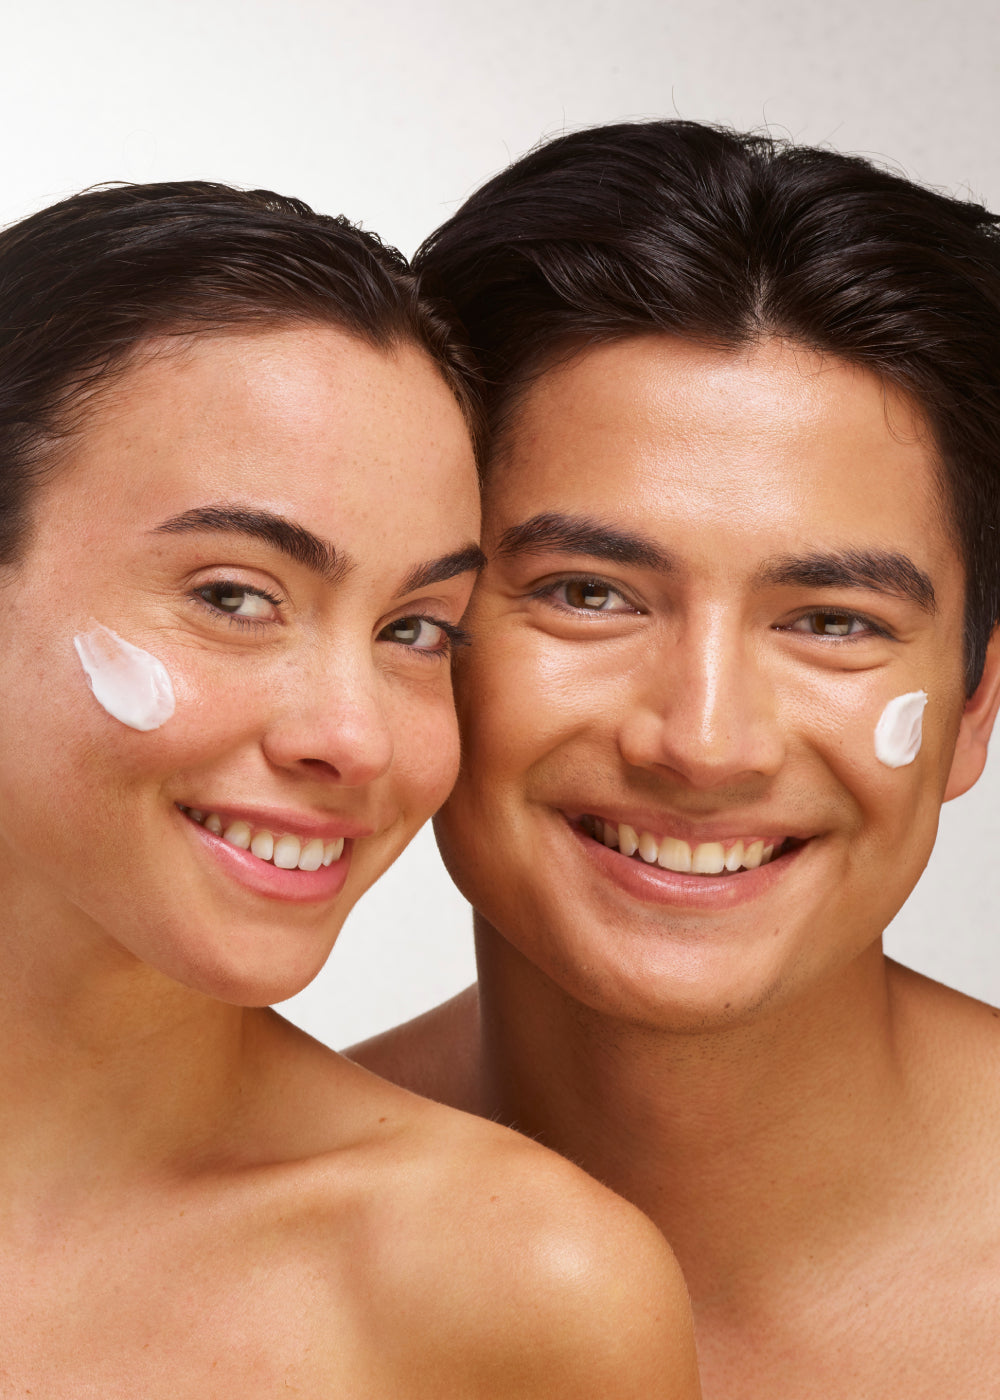 Smiling Couple using LightWater Fresh Daily Duo - how to use